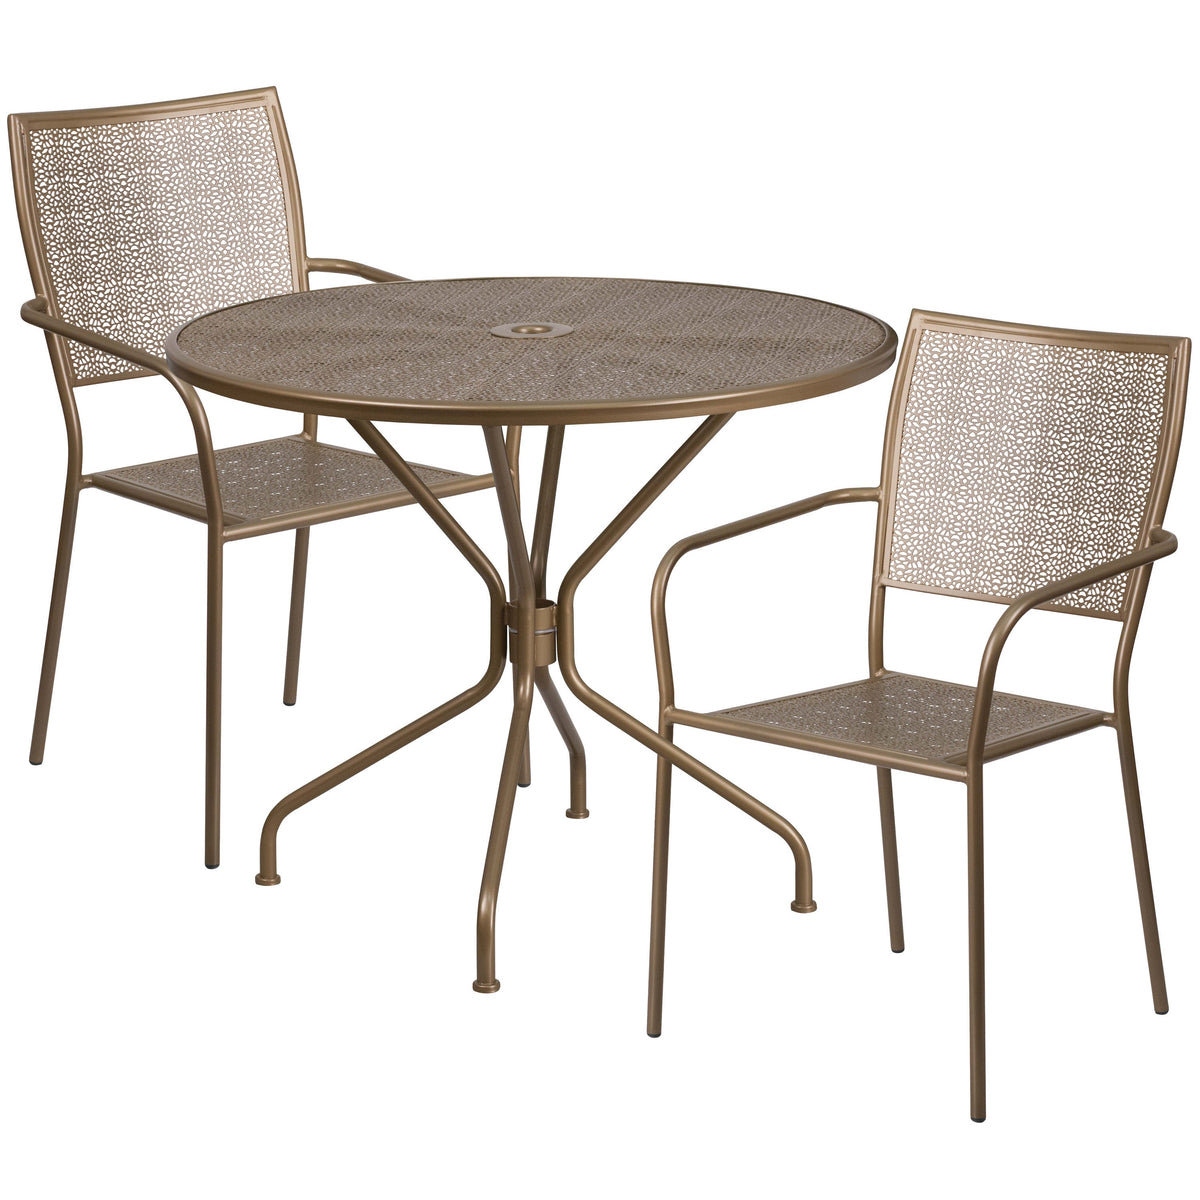 Gold |#| 35.25inch Round Gold Indoor-Outdoor Steel Patio Table Set w/ 2 Square Back Chairs